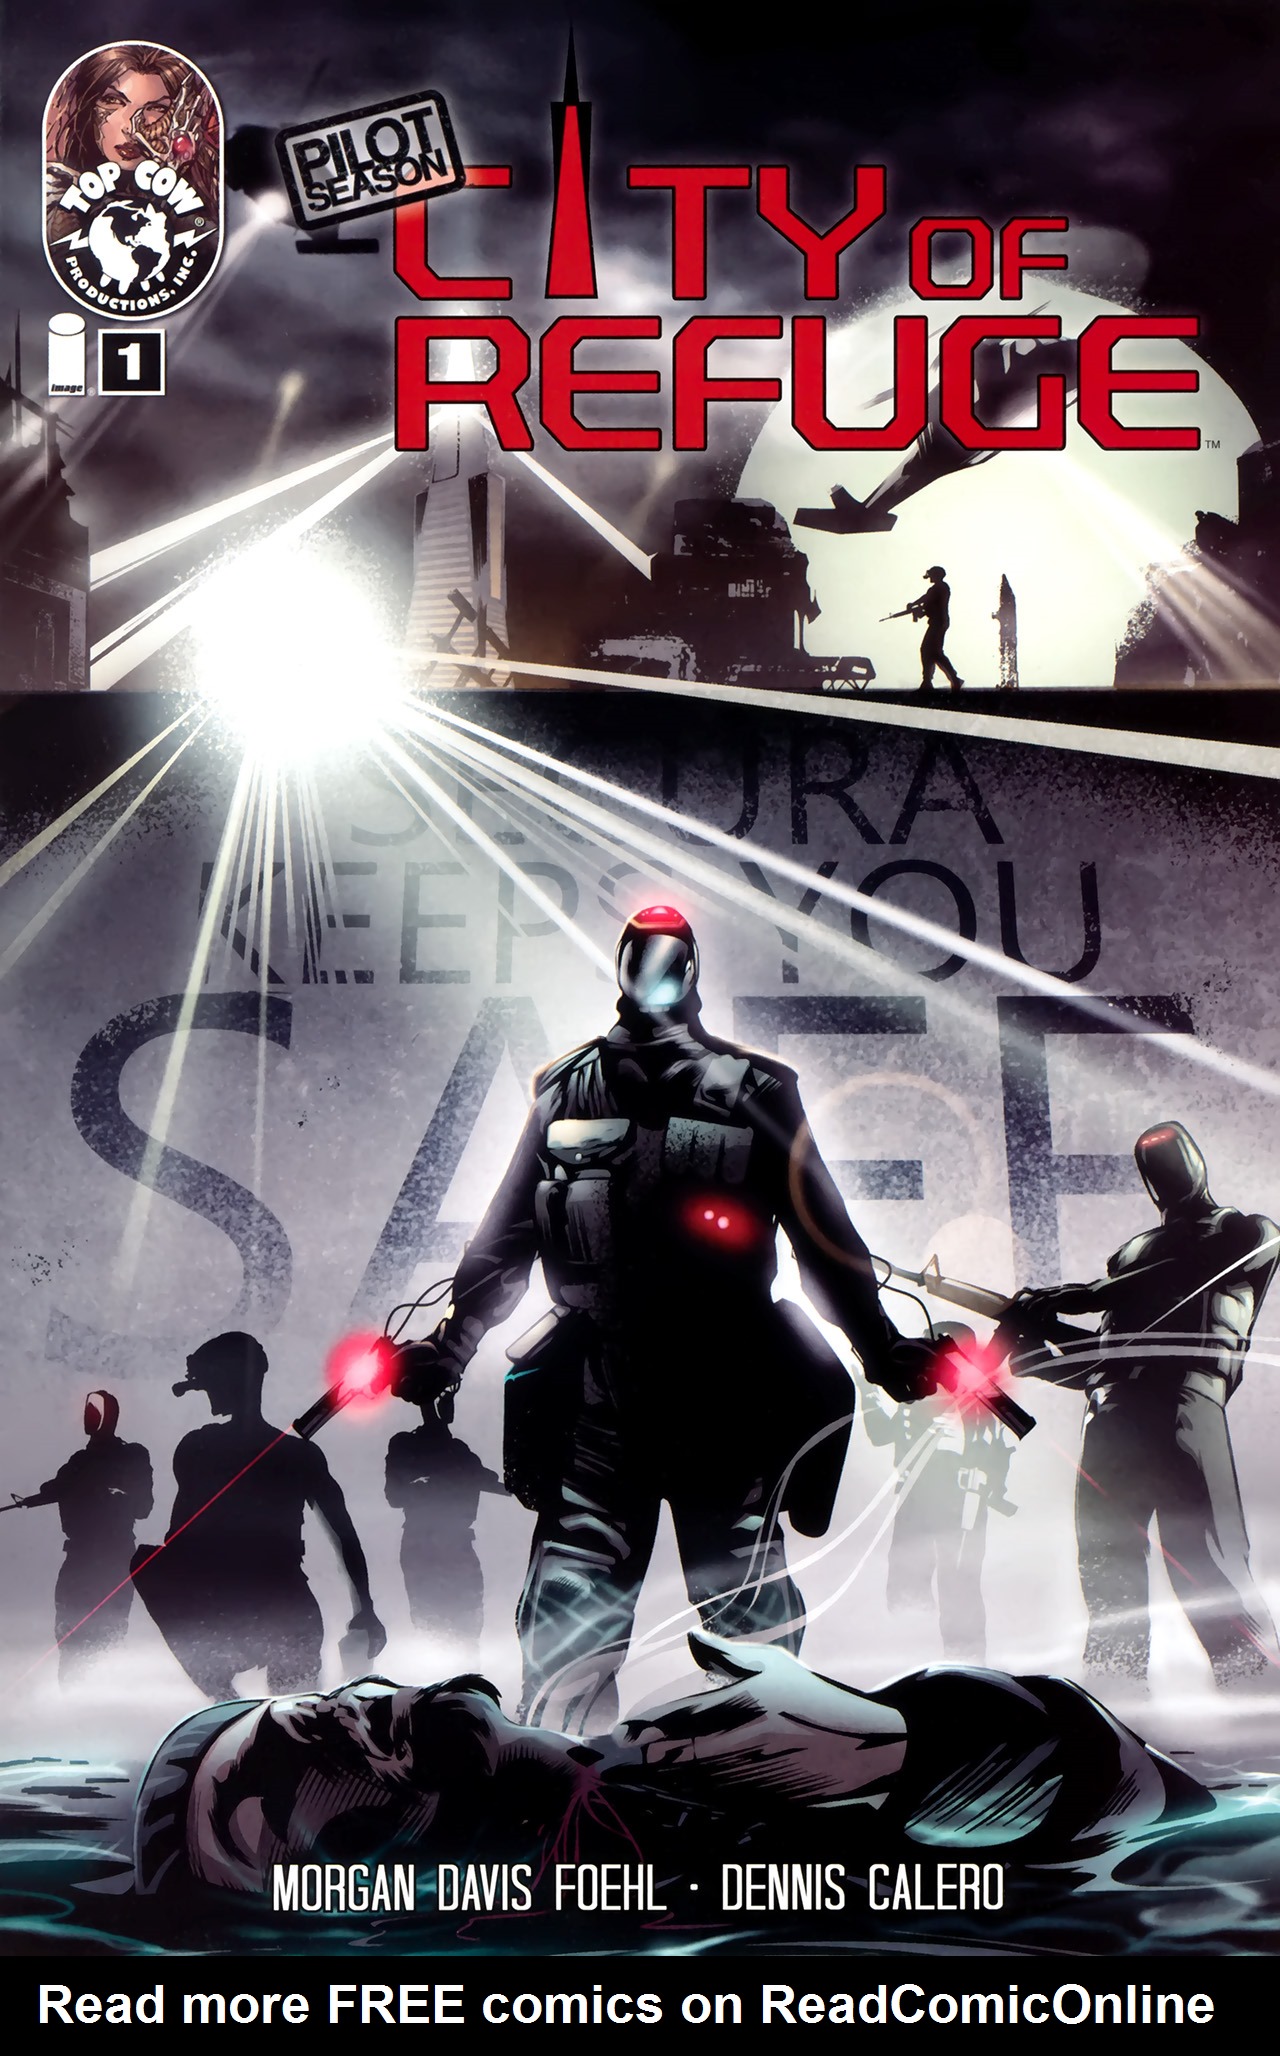 Read online Pilot Season 2011 comic -  Issue # Issue City Of Refuge - 1